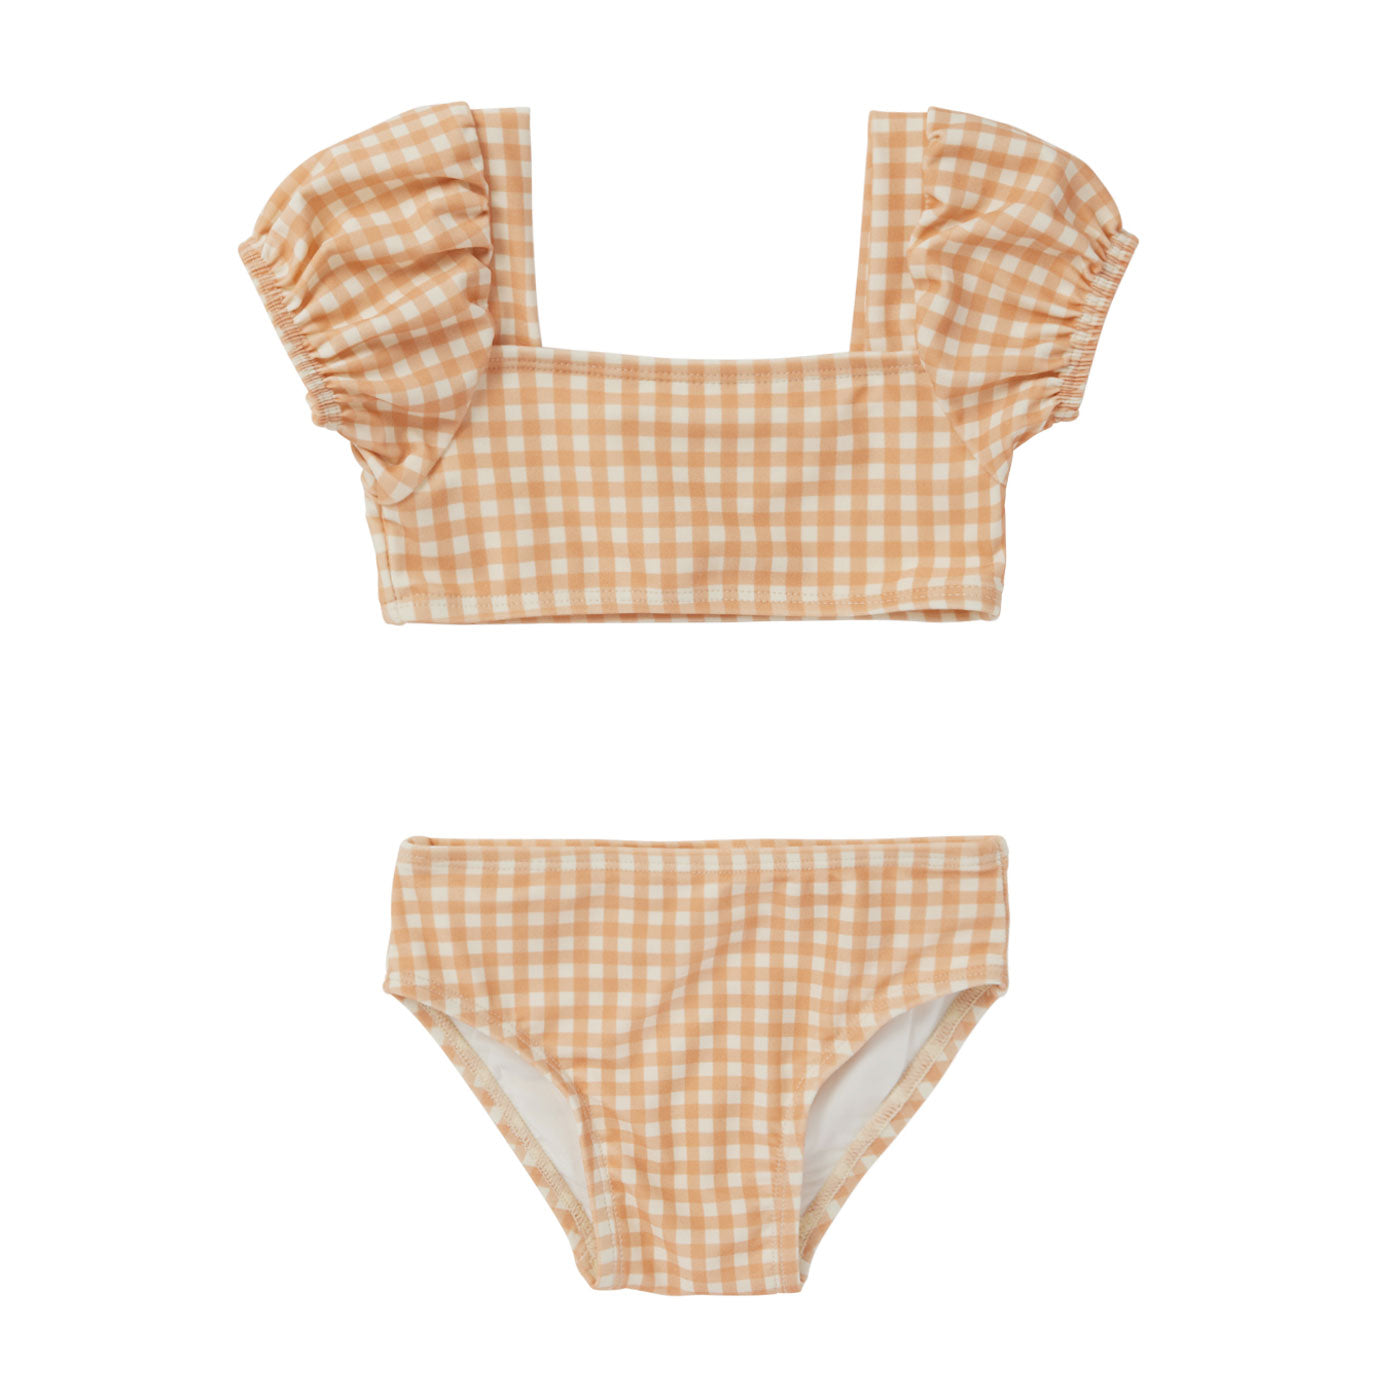 Quincy Mae Zippy Two-Piece Swimsuit - Melon Gingham